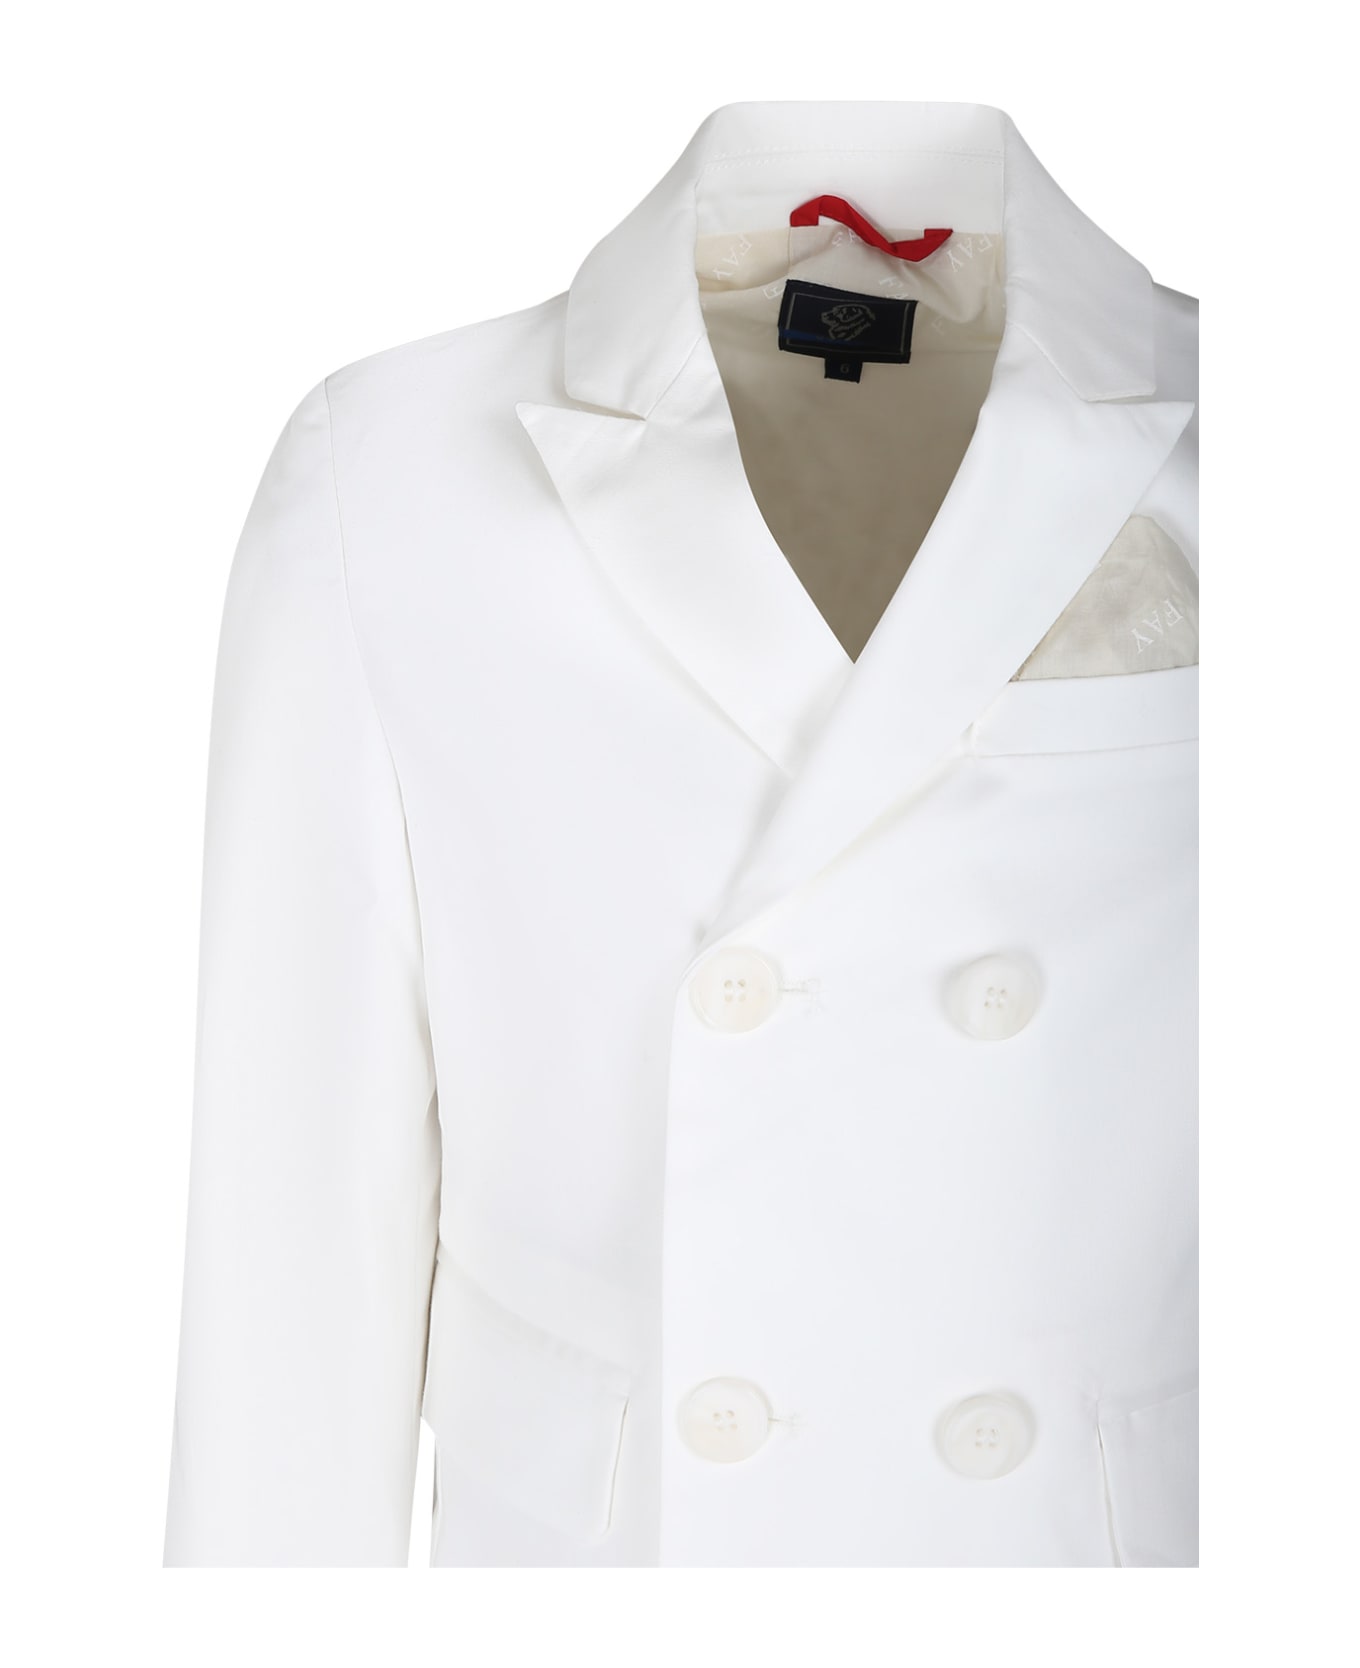 Fay White Suit For Boy - White スーツ